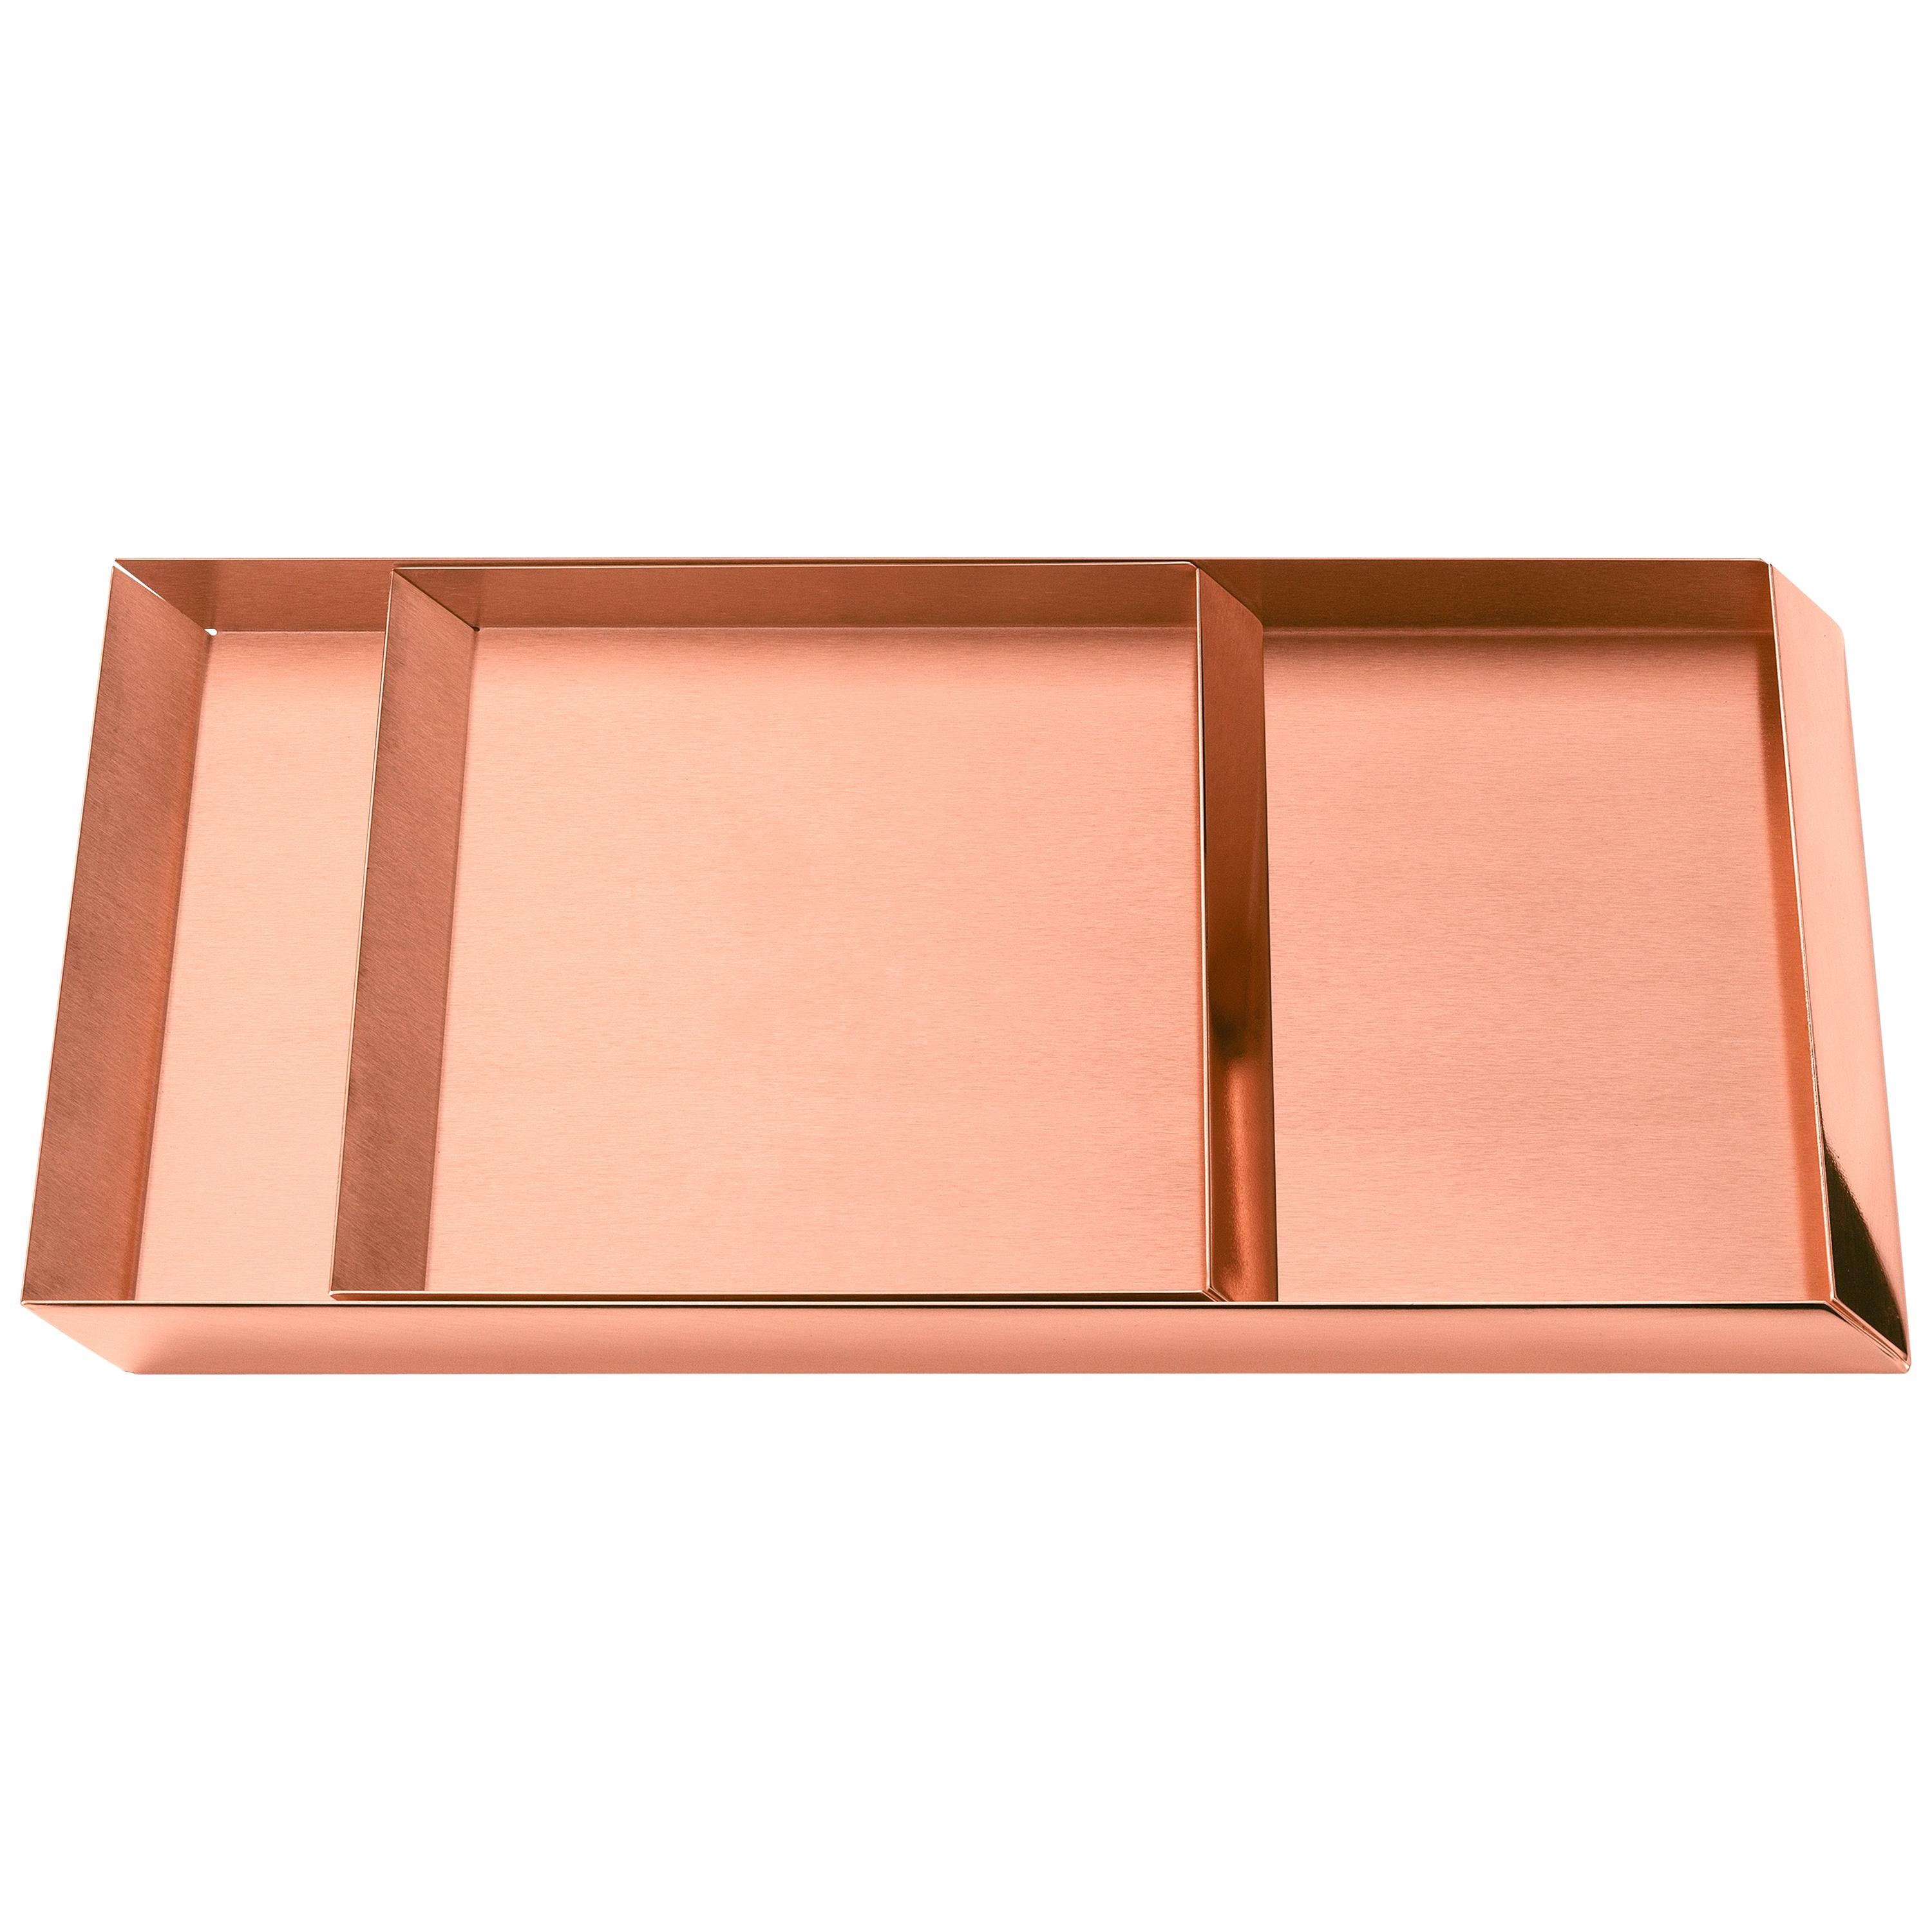 Set of 2 Ghidini 1961 Axonometry Trays in Copper by Elisa Giovanni